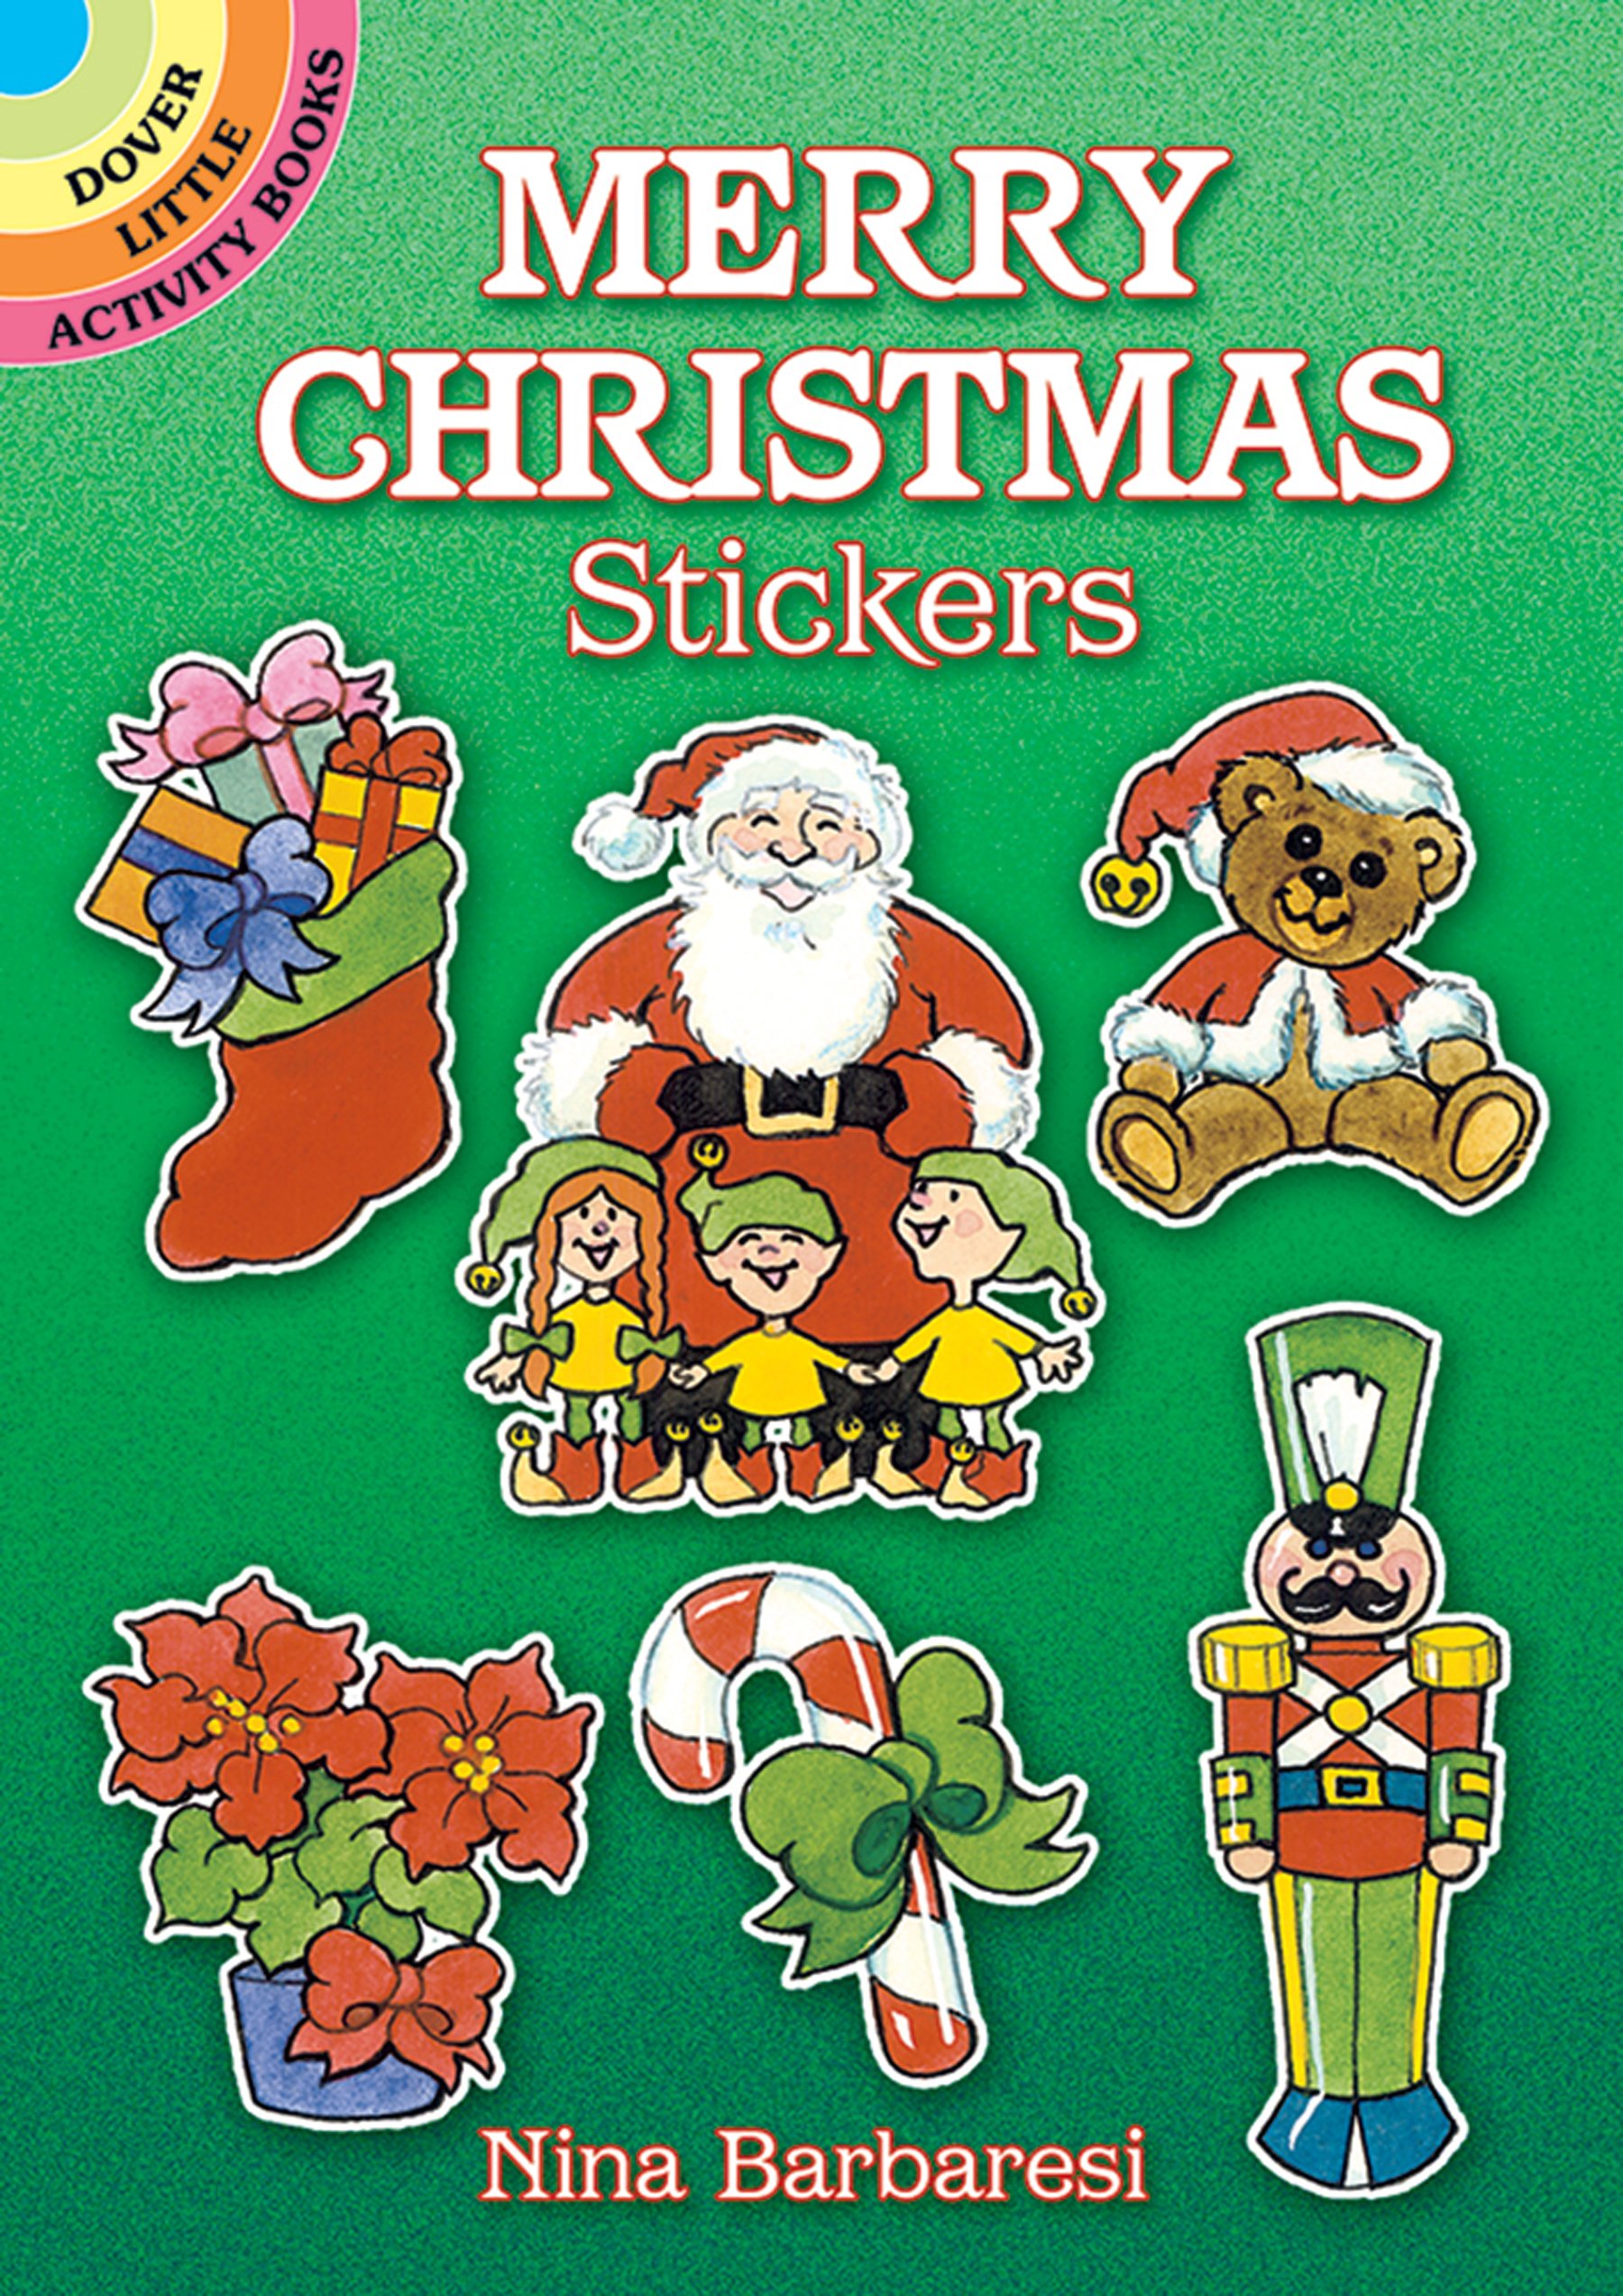 Christmas Stickers Wallpapers